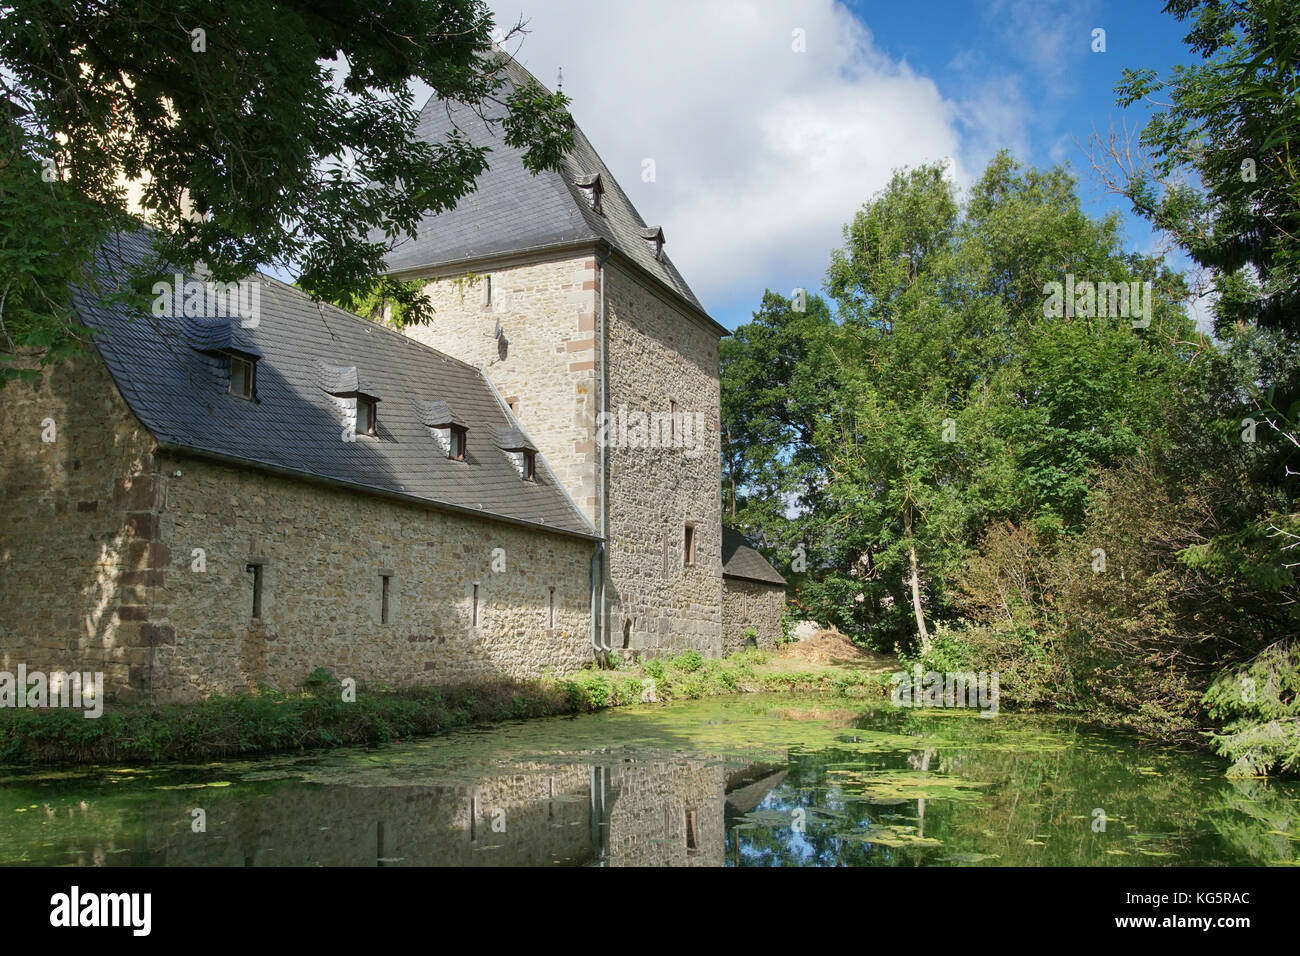 BITBURG, GERMANY - JUNE 26, 2017: Old Rittersdorf Castle close to Bitburg on June 26, 2017 in Germany, Europe Stock Photo